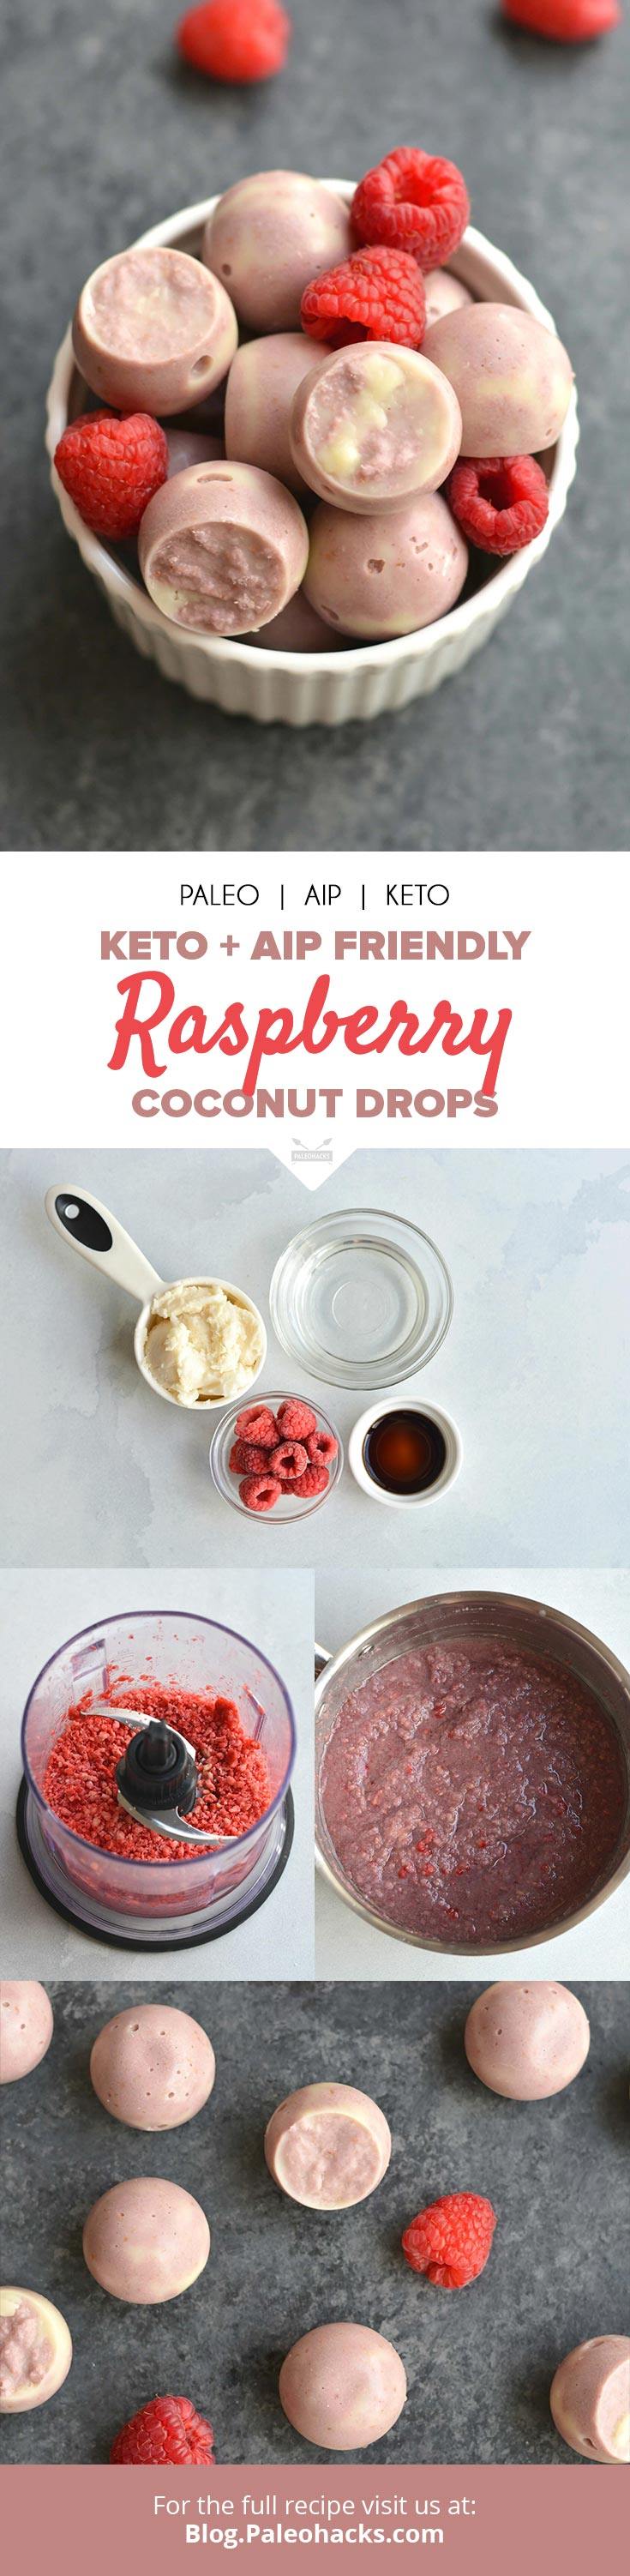 Load up on healthy fats with these keto and AIP Raspberry Coconut Drops made with zero refined sugar.